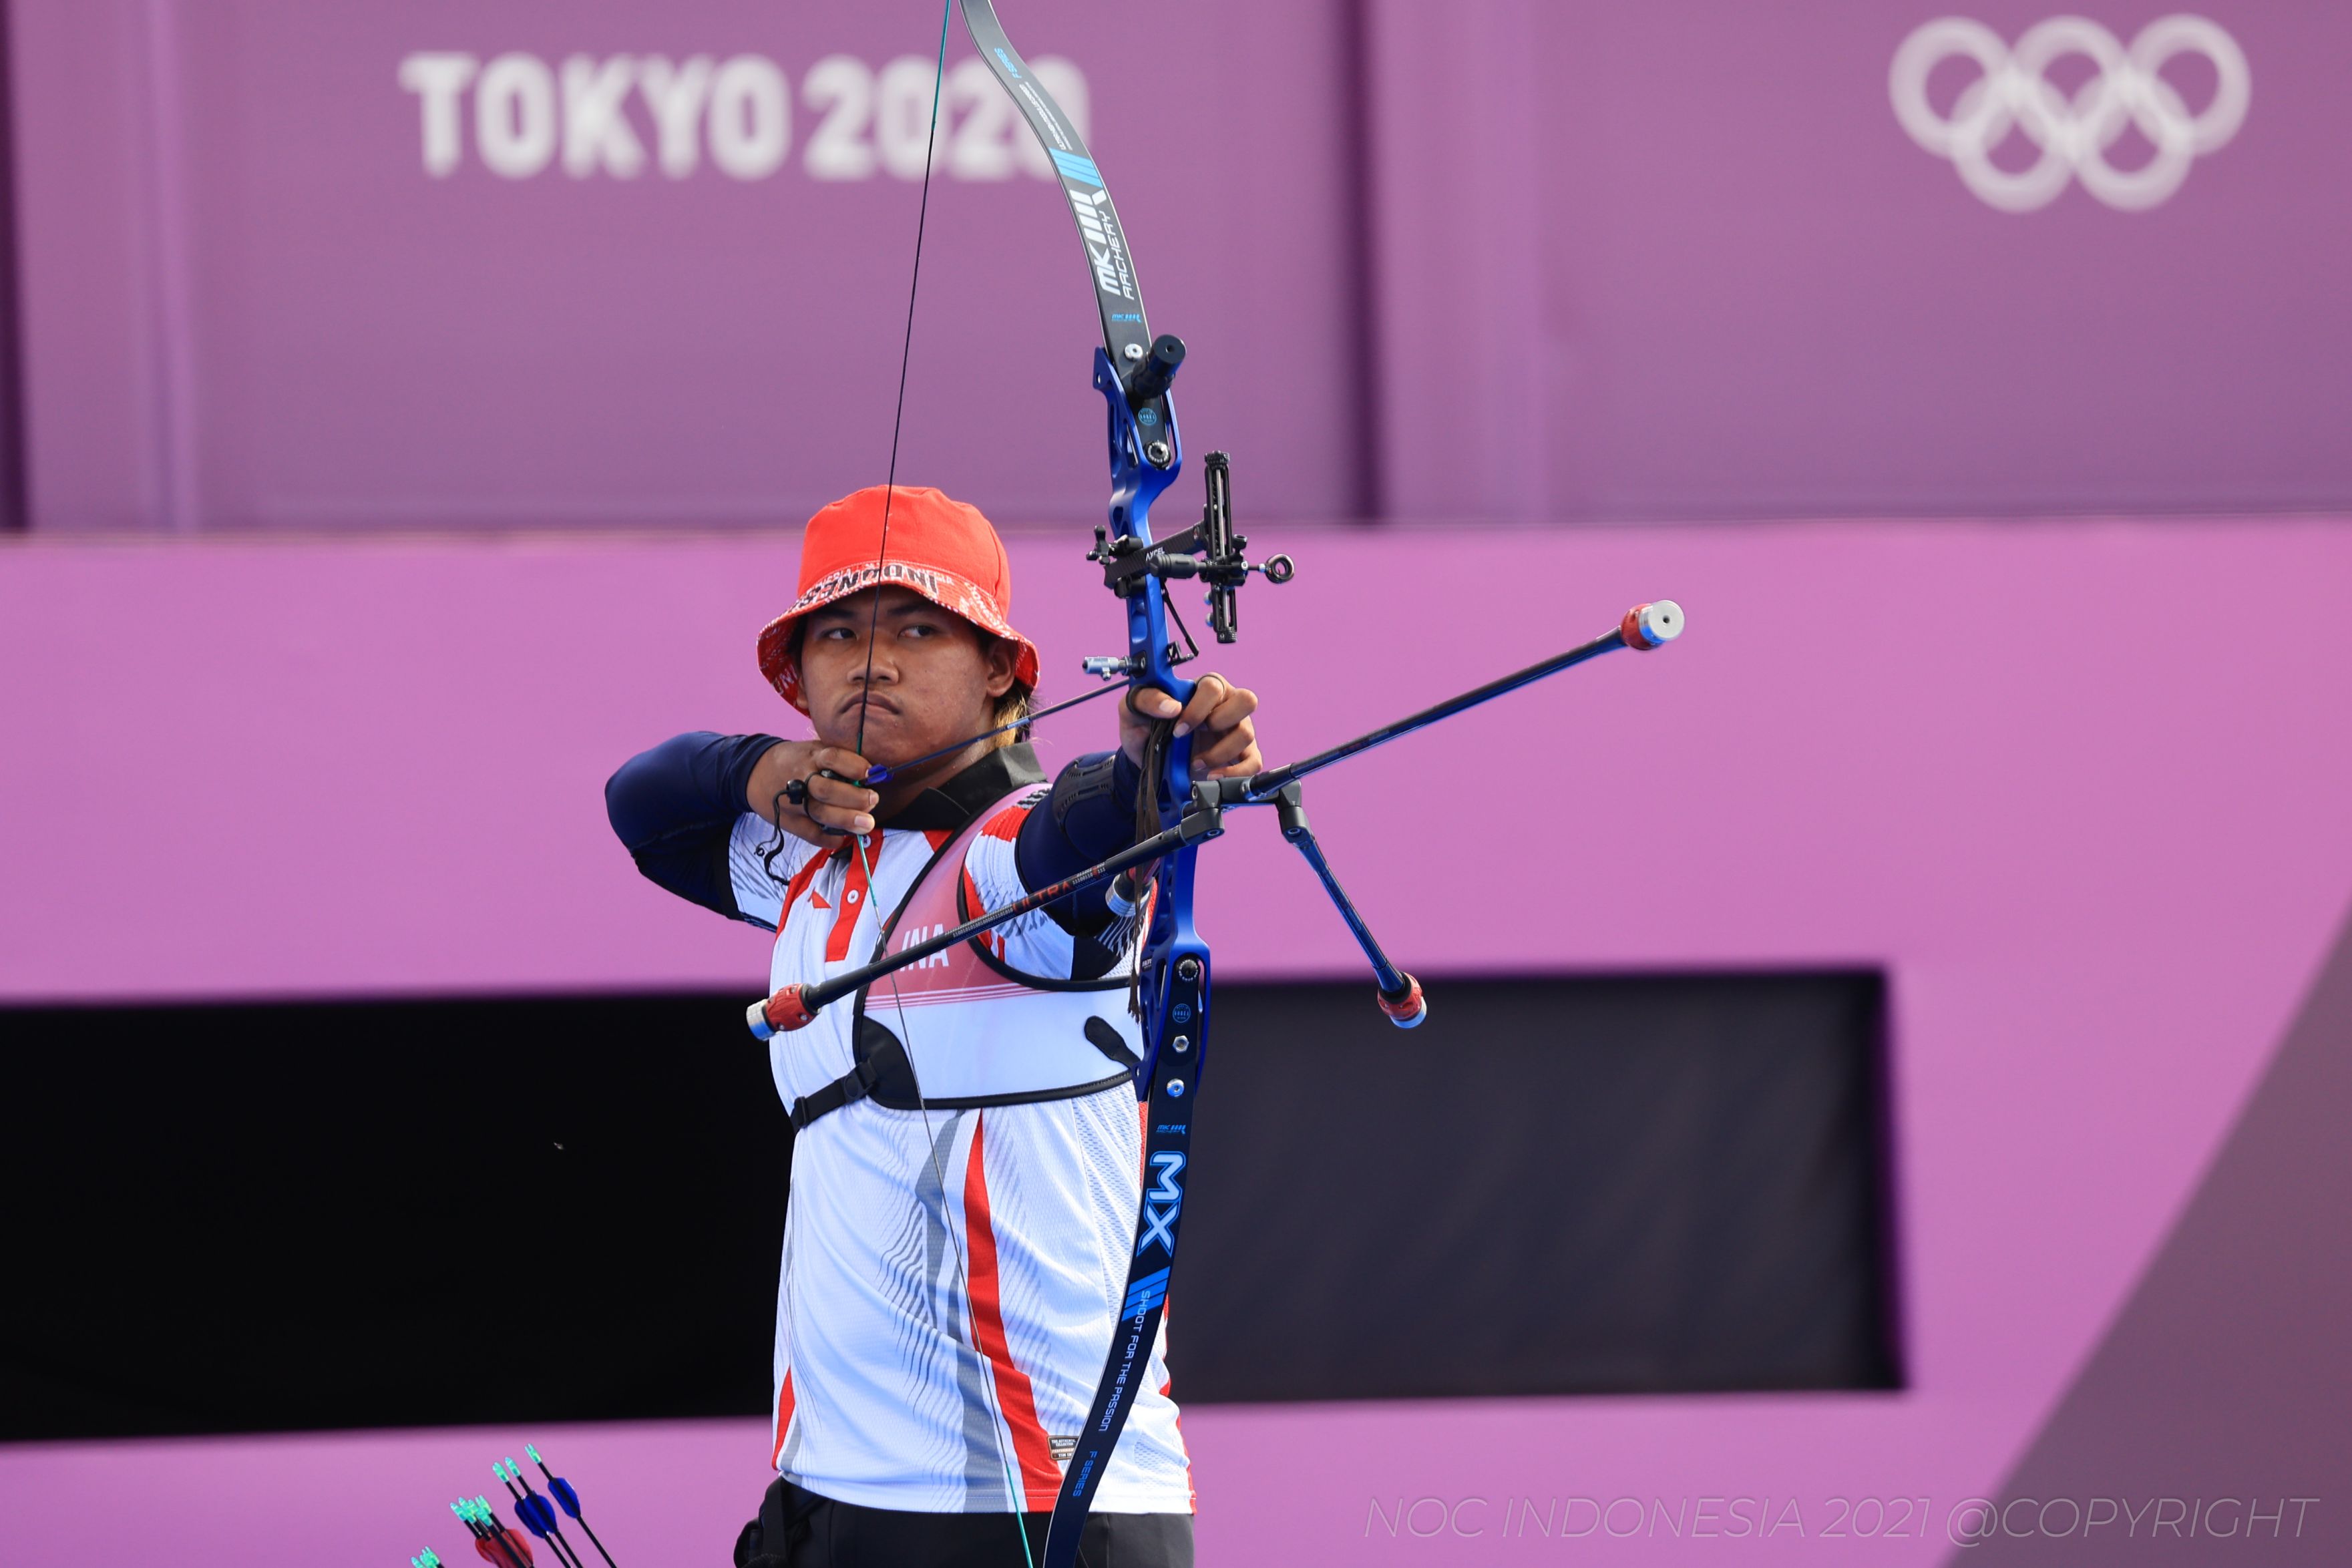 Extreme wind disrupts Arif Dwi Pangestu's focus - Indonesia Olympic Commitee